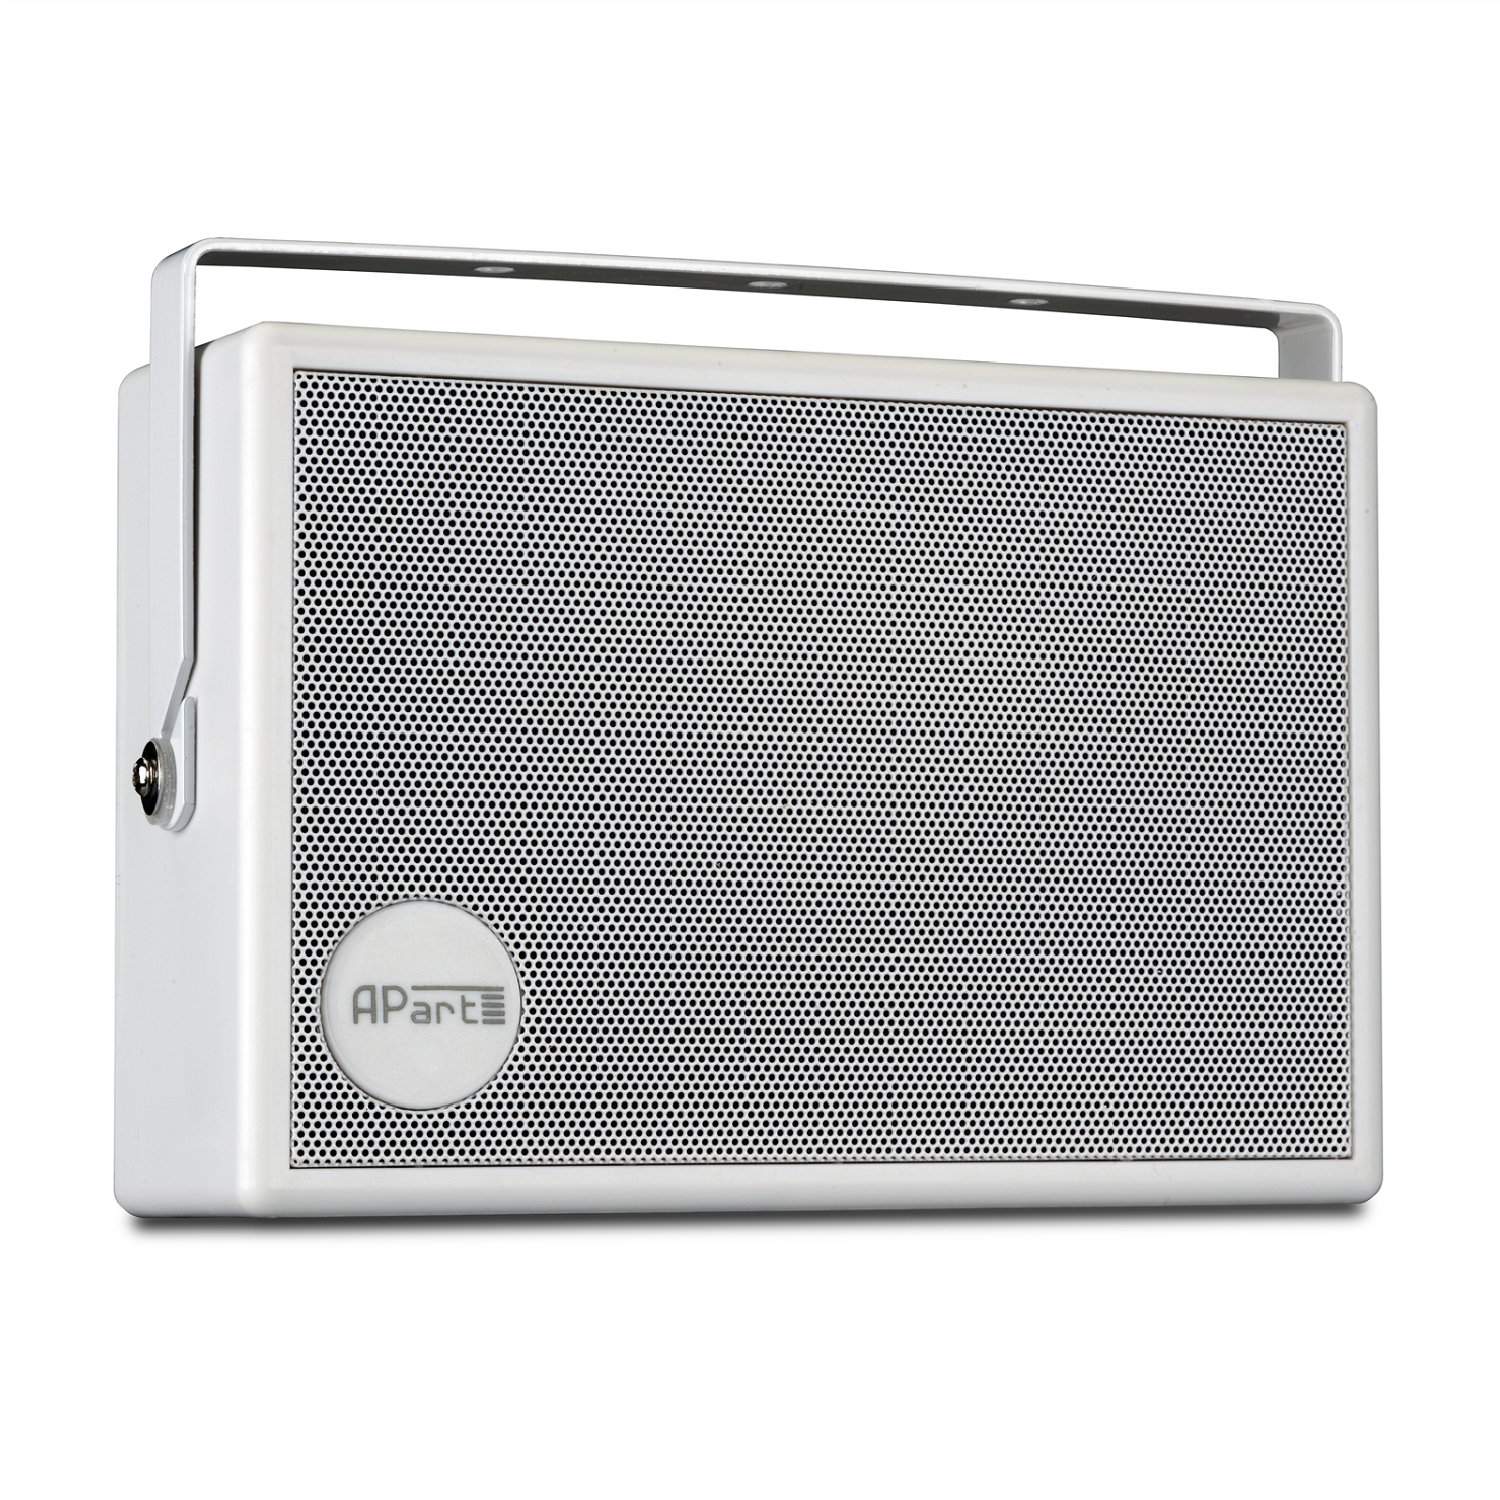 On-wall speaker with back plate and U-bracket, 100 volt / 6 watts , SMB6 W , APART